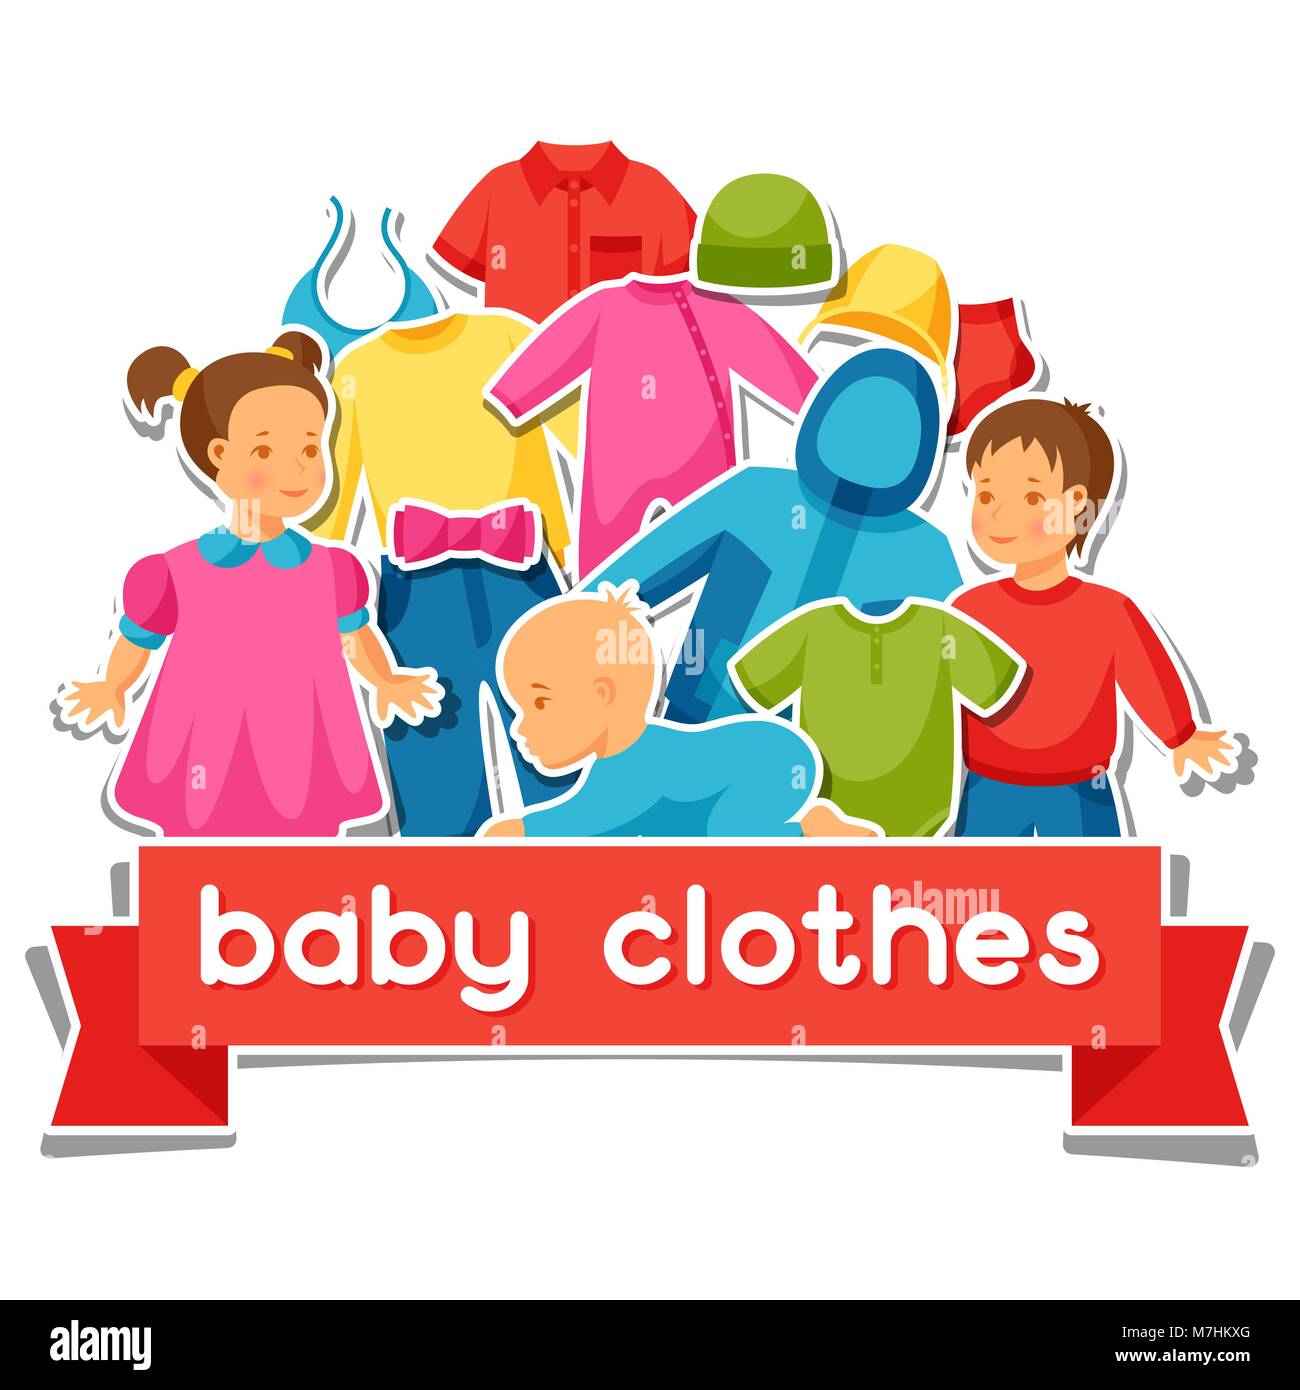 Clothing items Stock Vector Images - Alamy